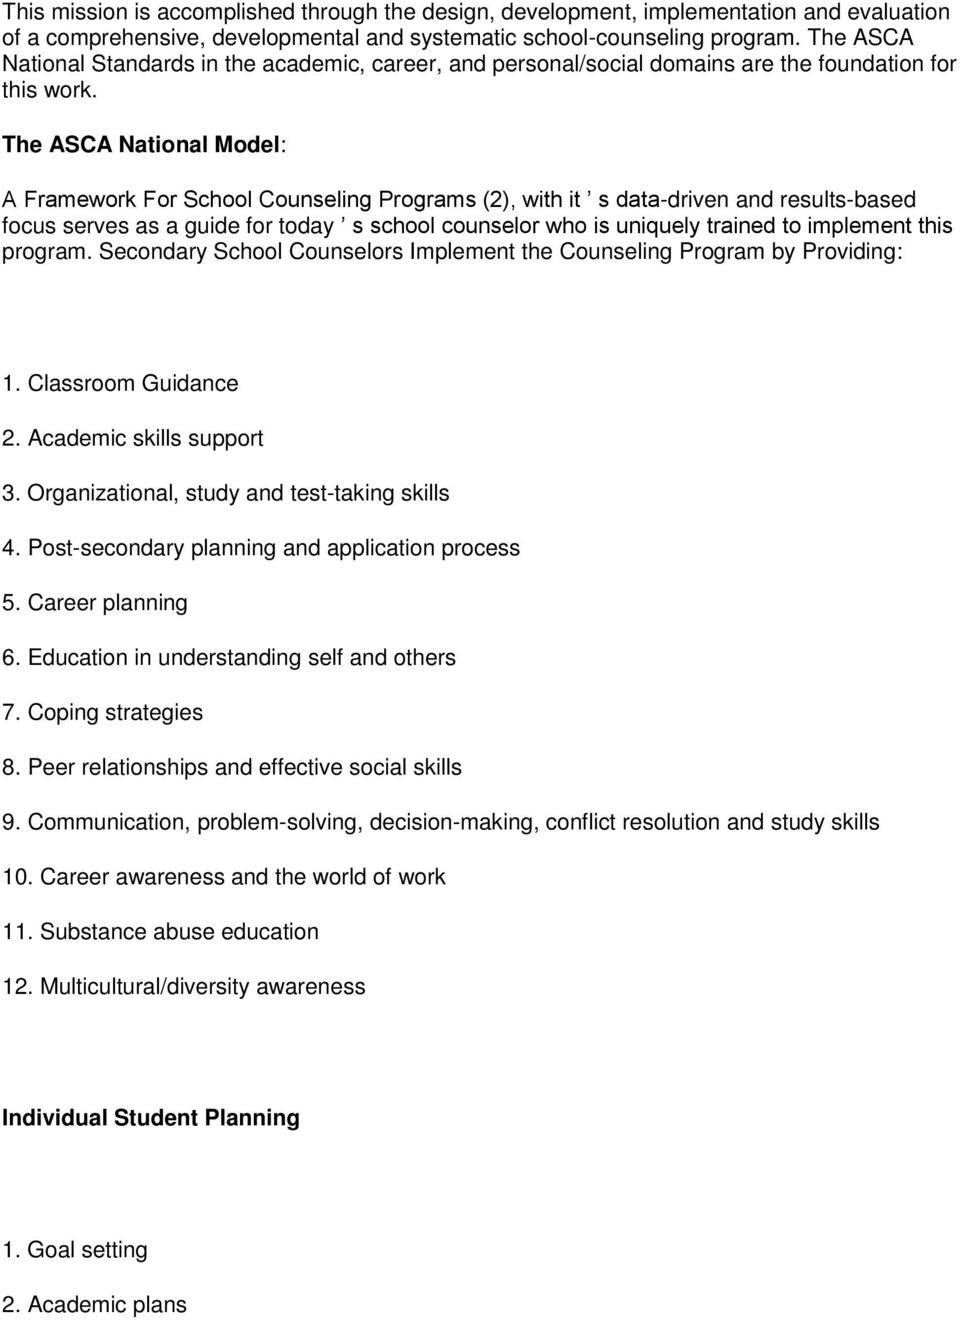 The ASCA National Model: A Framework For School Counseling Programs (2), with it s data-driven and results-based focus serves as a guide for today s school counselor who is uniquely trained to